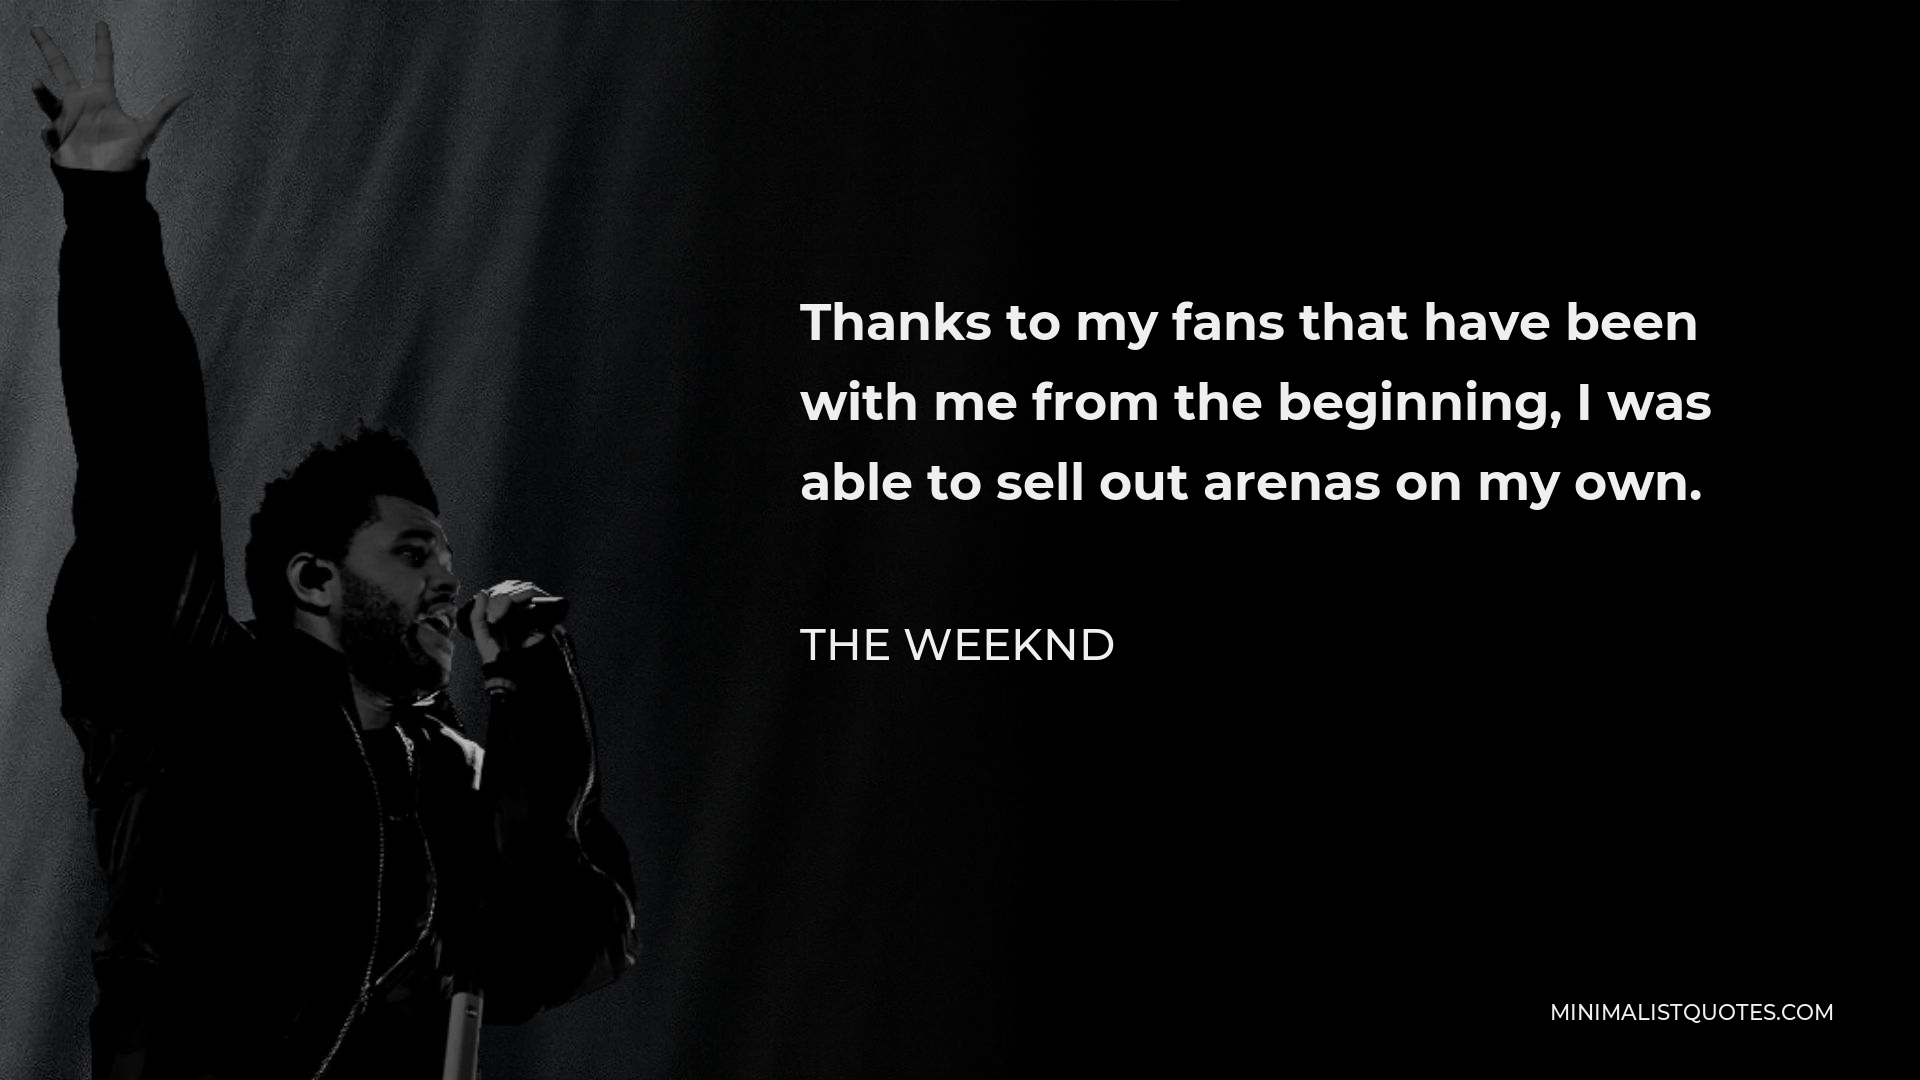 The Weeknd Quote - Thanks to my fans that have been with me from the beginning, I was able to sell out arenas on my own.